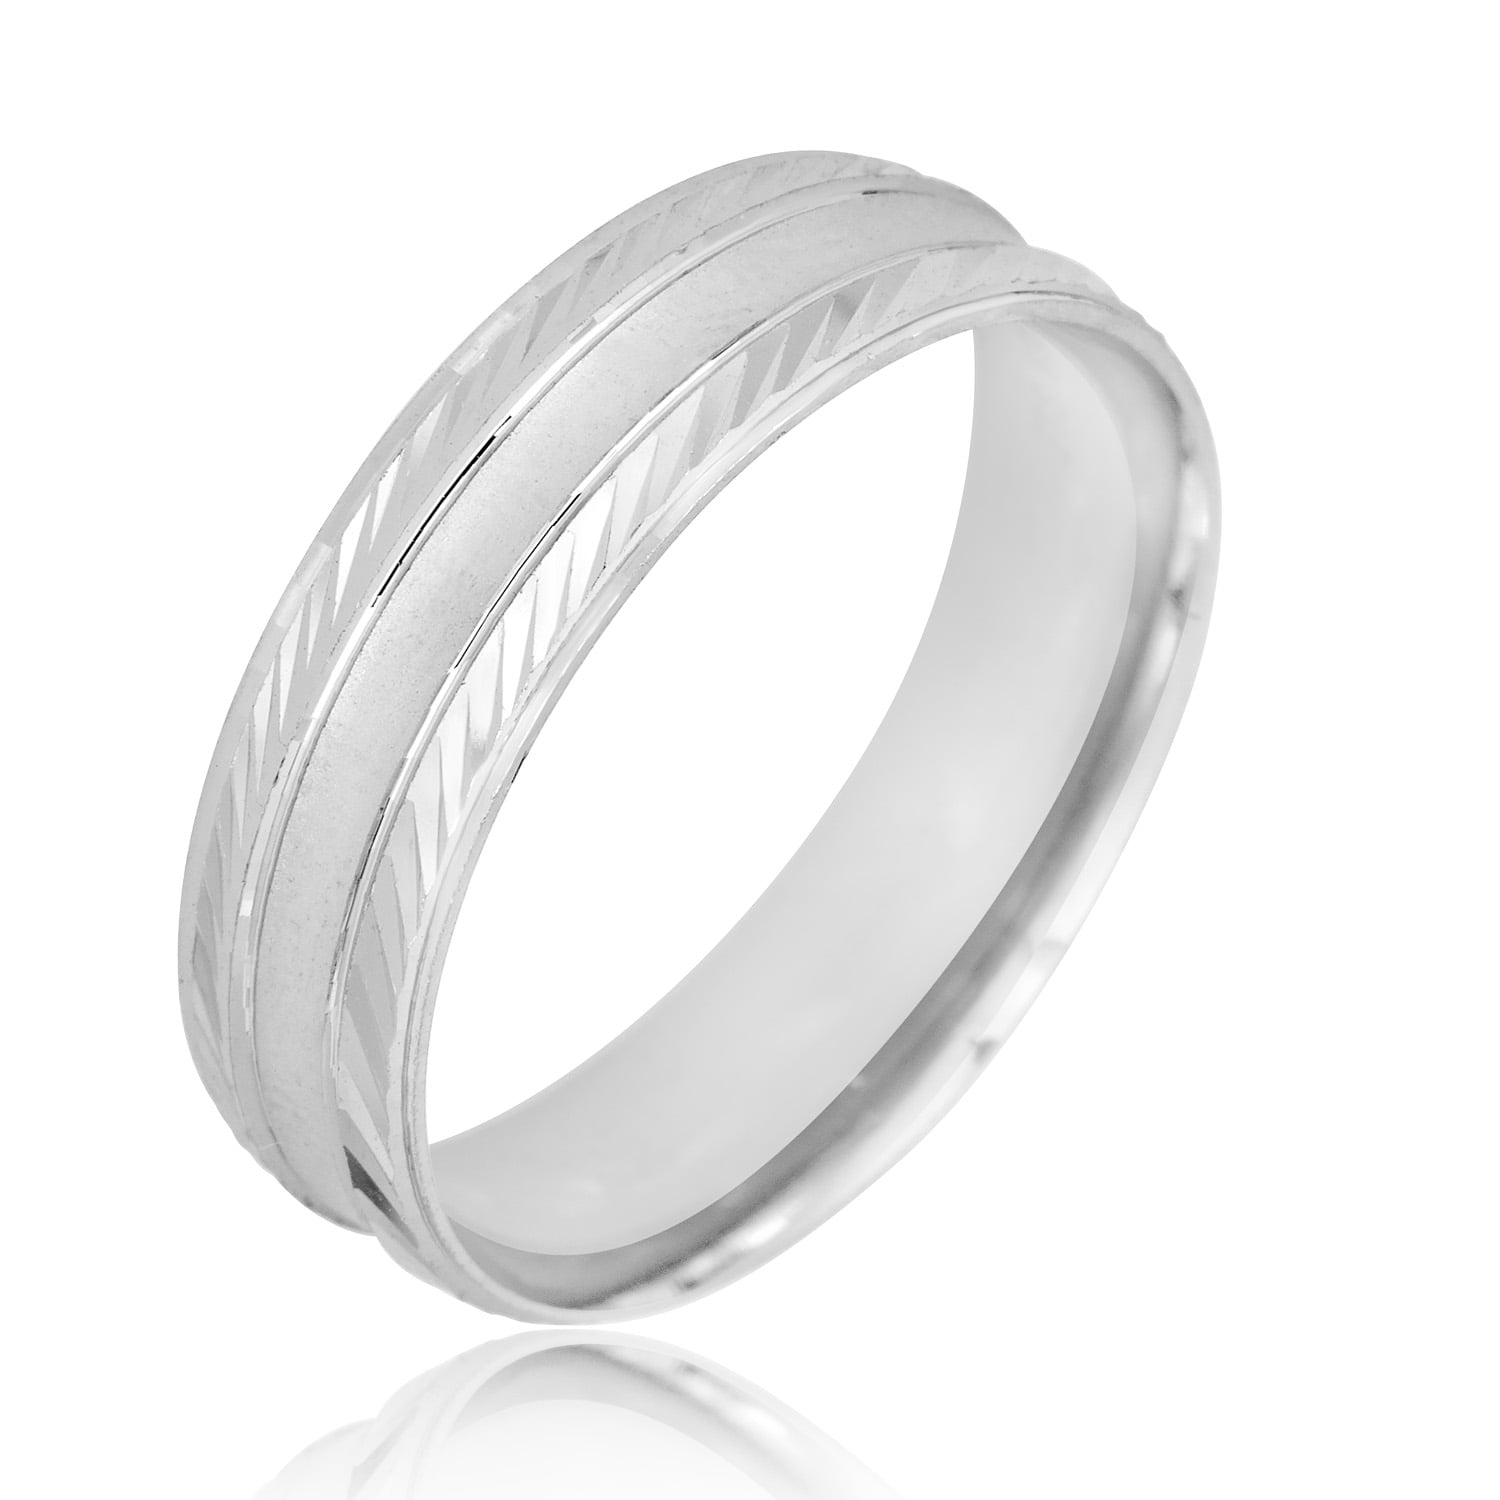 AVORA JEWELRY 925 Sterling Silver Men's 6mm Brushed